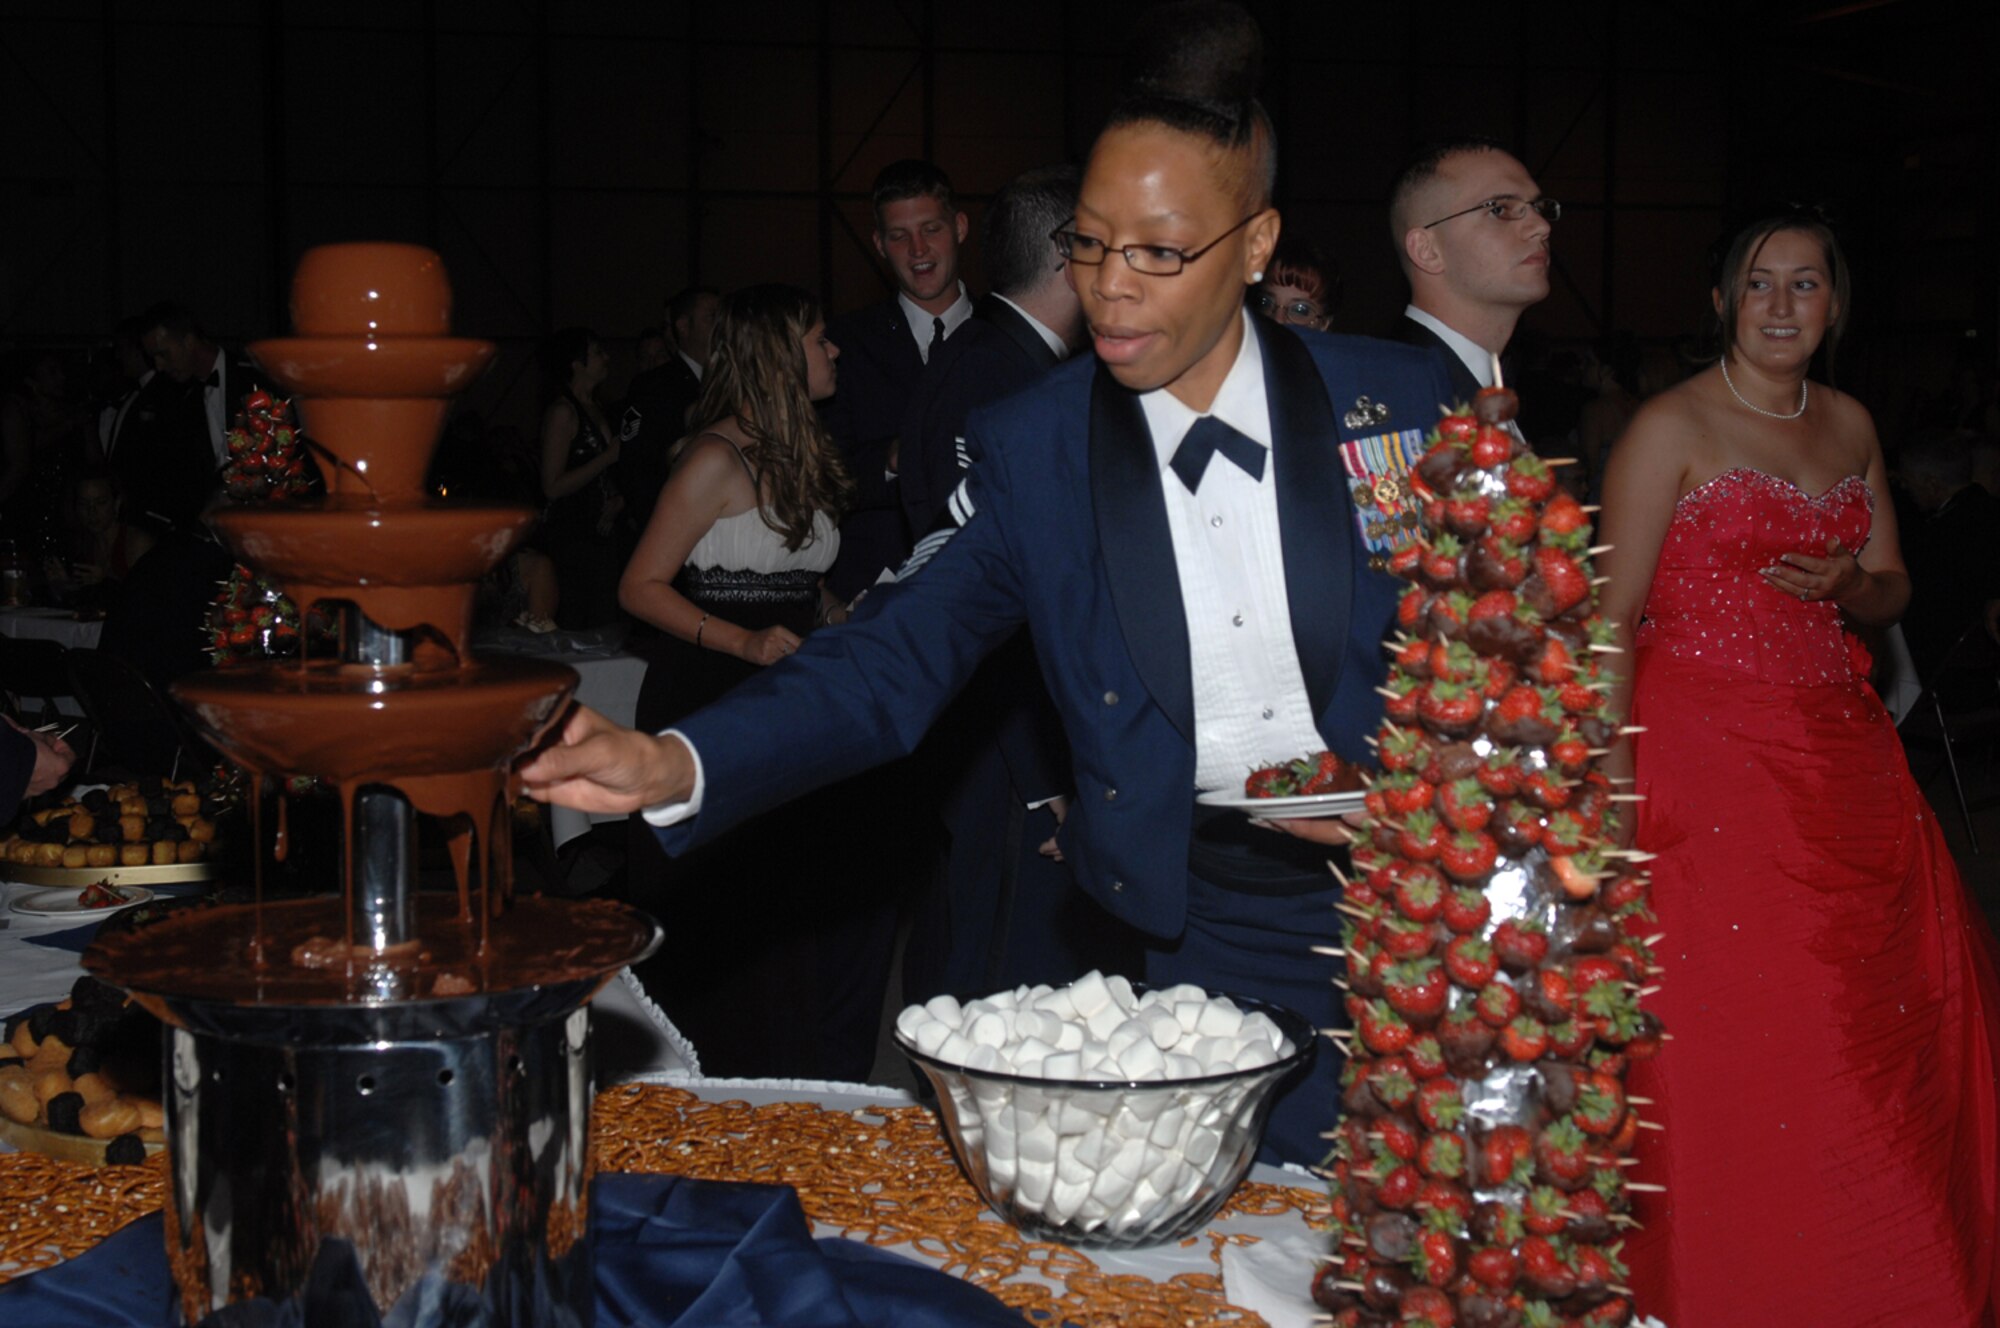 Senior Master Sgt. Tracy Goodwin, 48th Services Squadron, partakes of goodies during the 60th Anniversary Air Force ball at RAF Lakenheath Sept. 8. More than 500 Liberty warriors attended the event. (U.S. Air Force photo by Tech. Sgt. Sabrina Johnson)